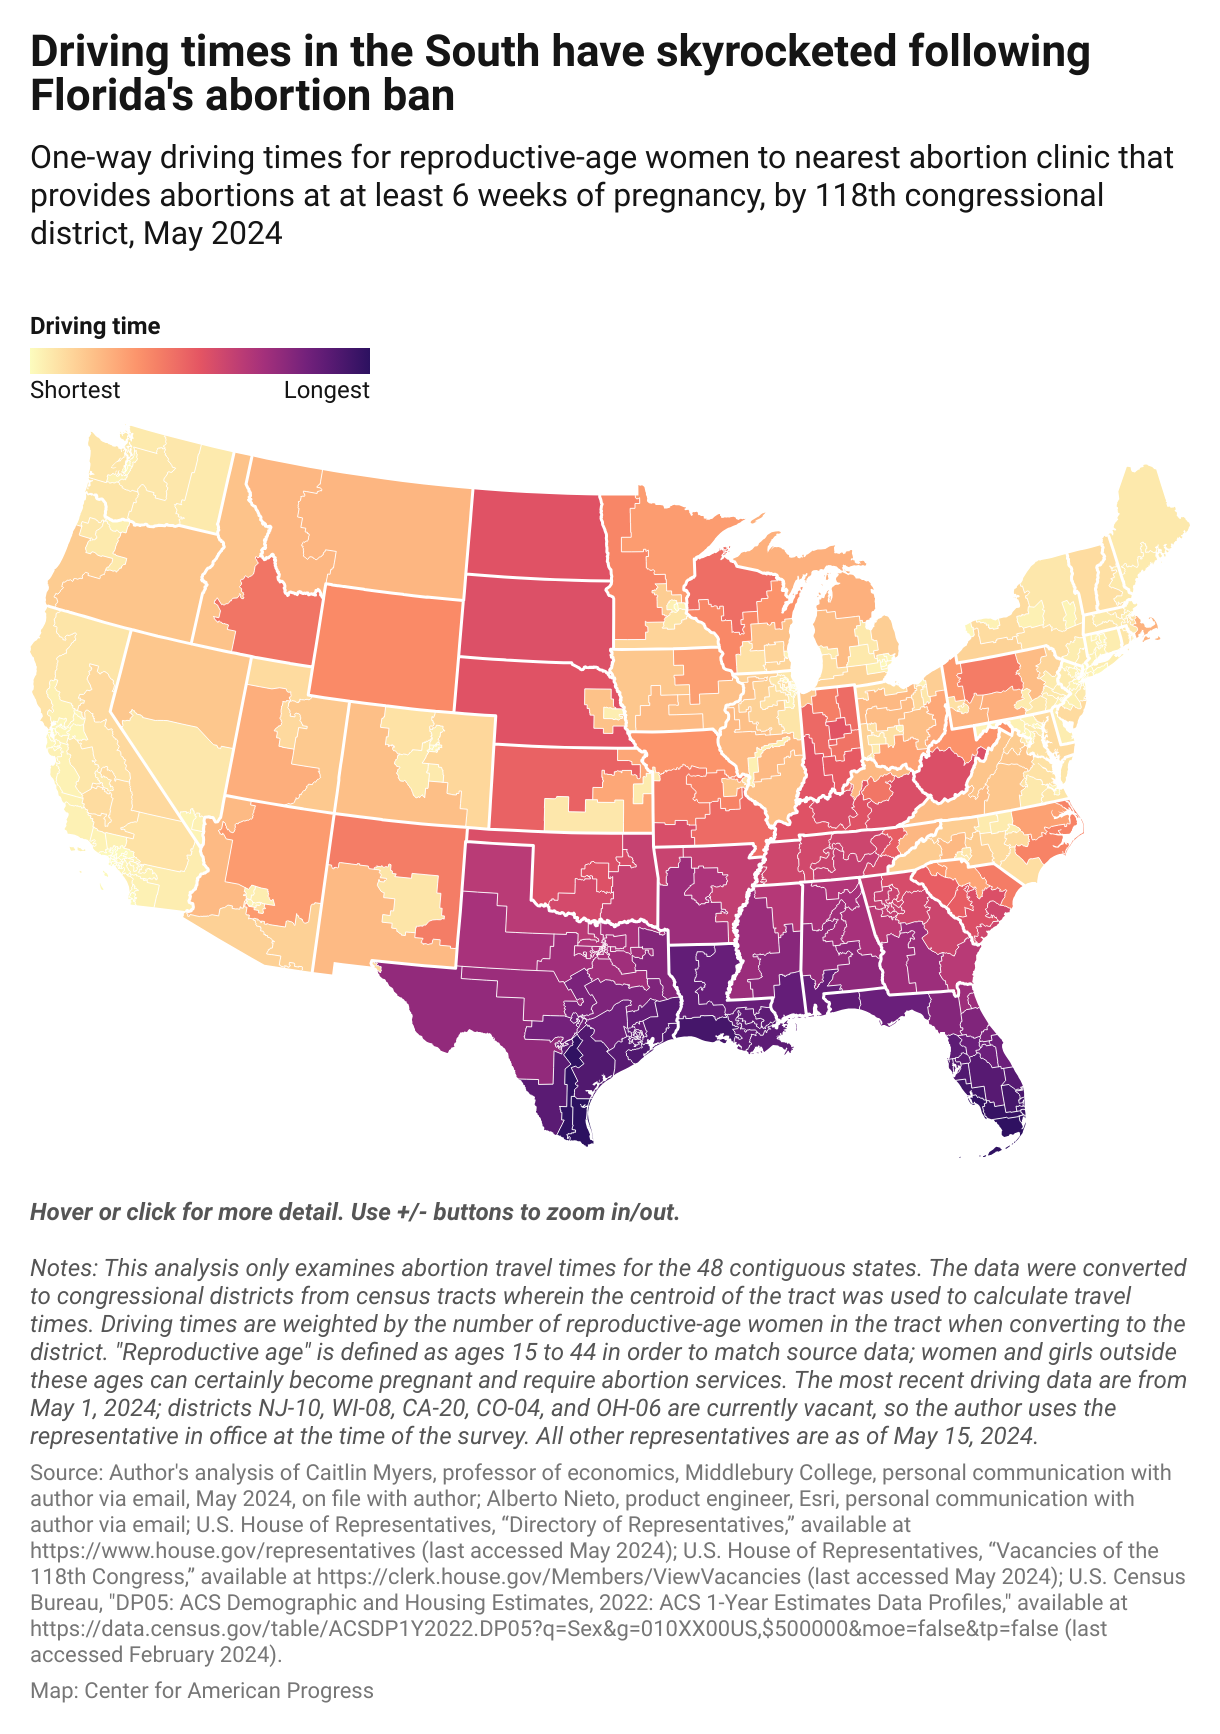 A choropleth map comparing the change in driving times to an abortion clinic for reproductive-age women by congressional district from August 2021 with May 2024, showing that the largest increases in driving times were seen in the South.